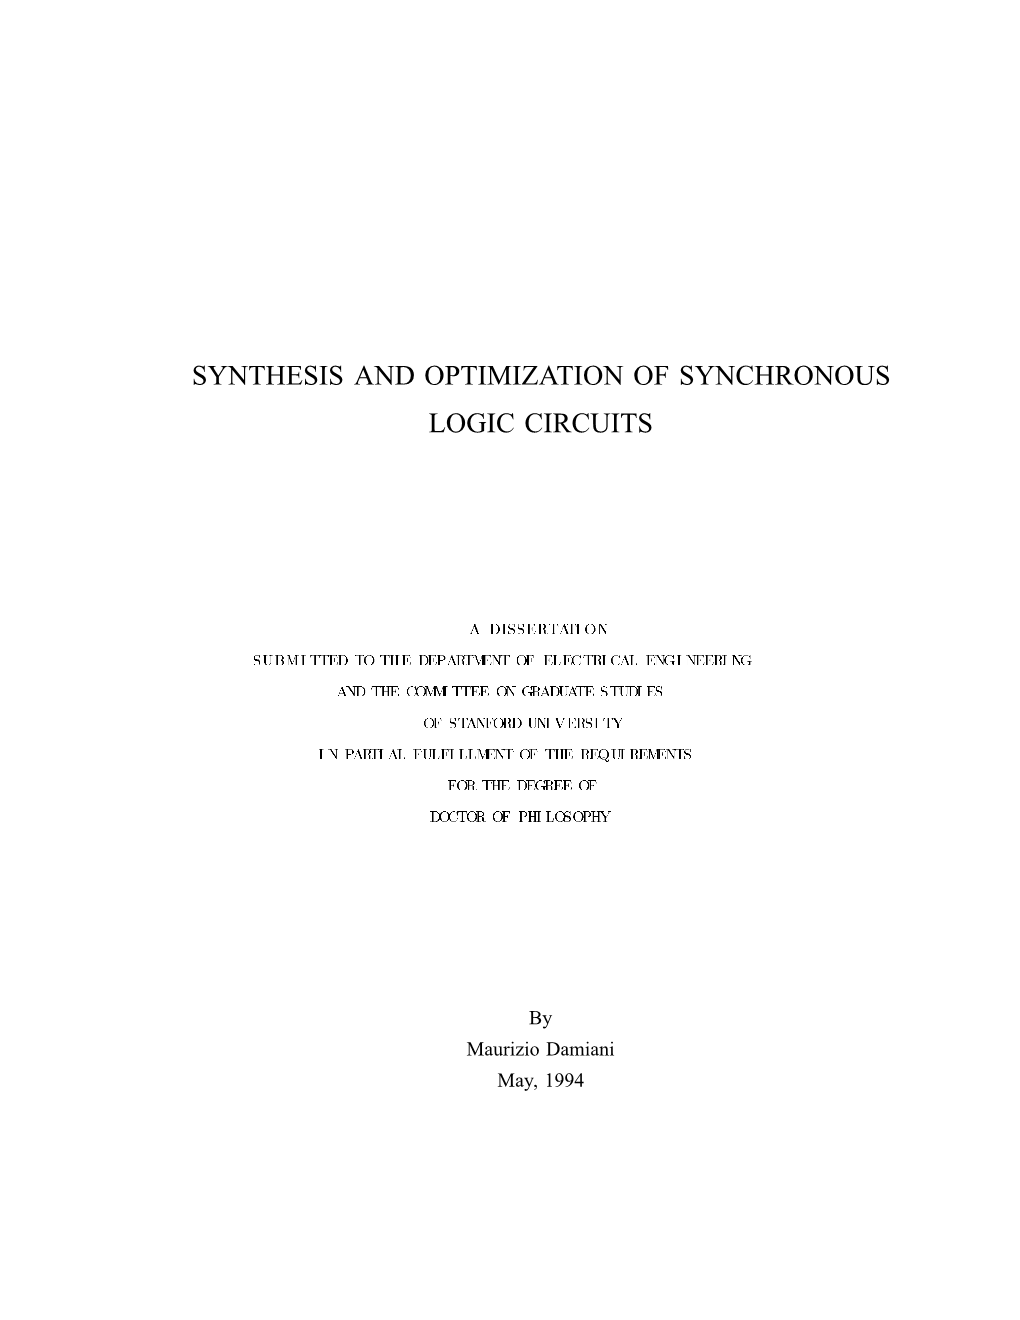 Synthesis and Optimization of Synchronous Logic Circuits